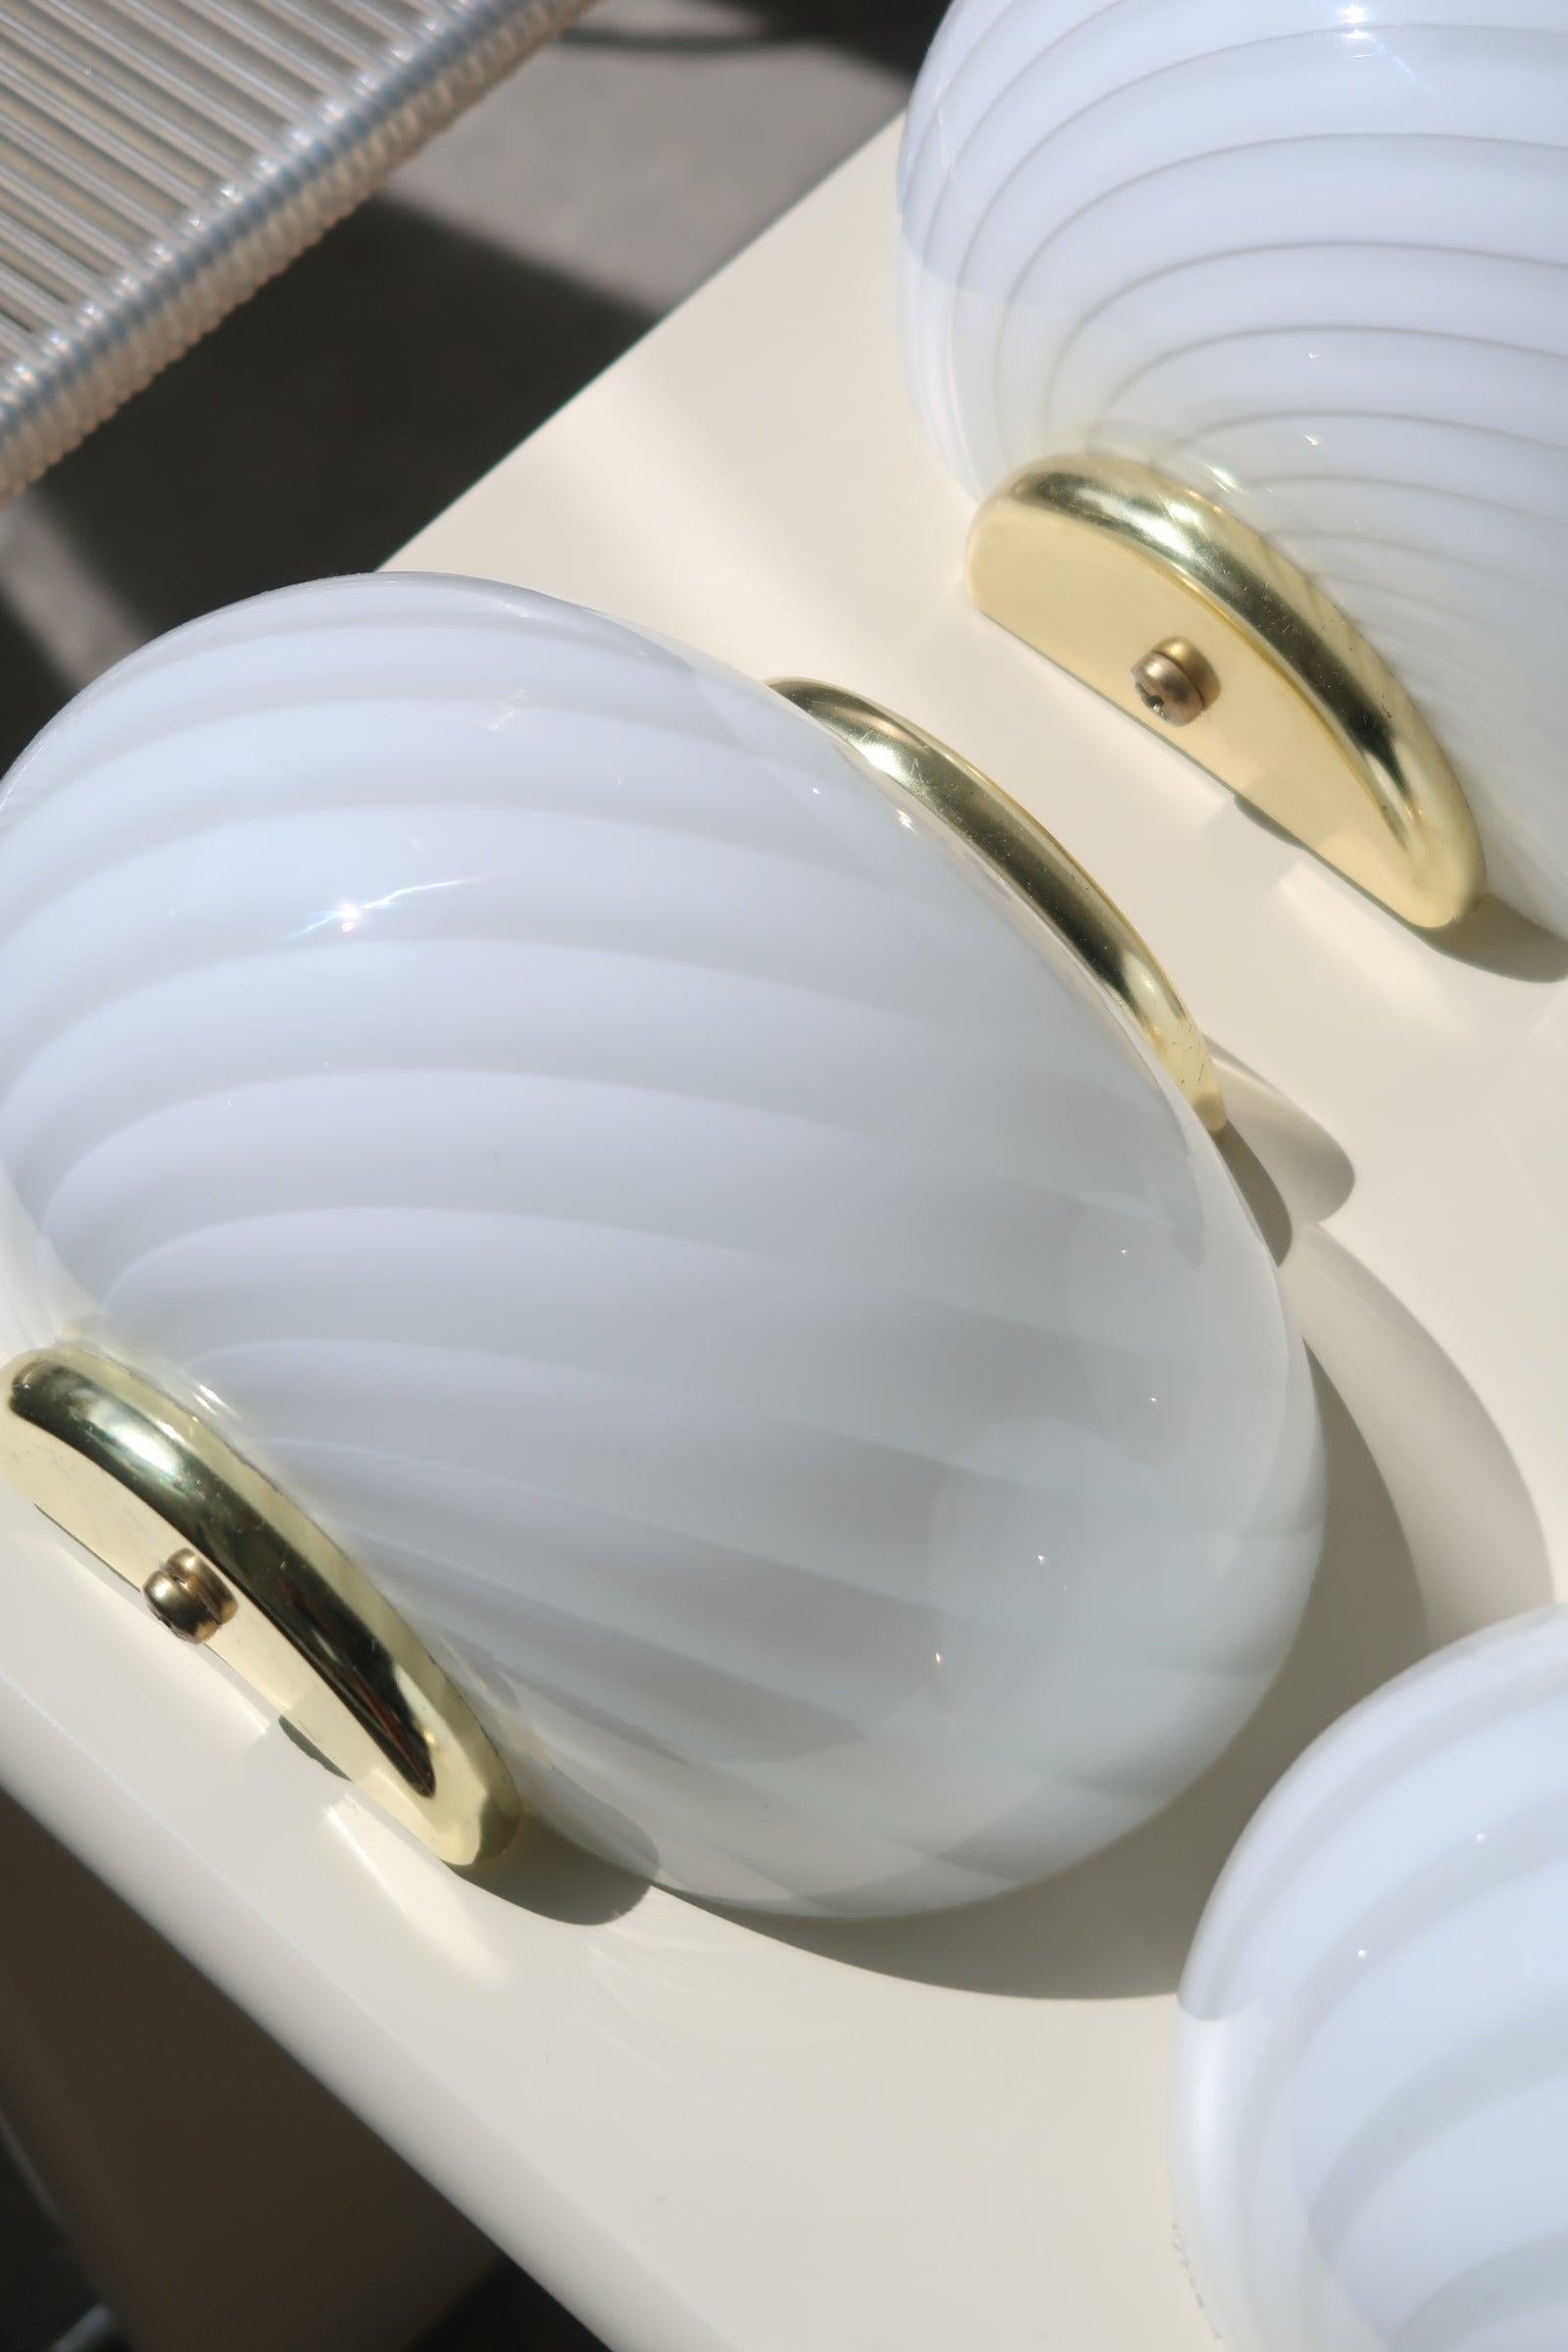 Beautiful, classic vintage Murano wall lamp in white glass with swirl pattern and brass fittings. Perfect size for your entrance, in the kitchen, in the bathroom or as a reading lamp in the bedroom. Super easy to install. The lamps originate from a